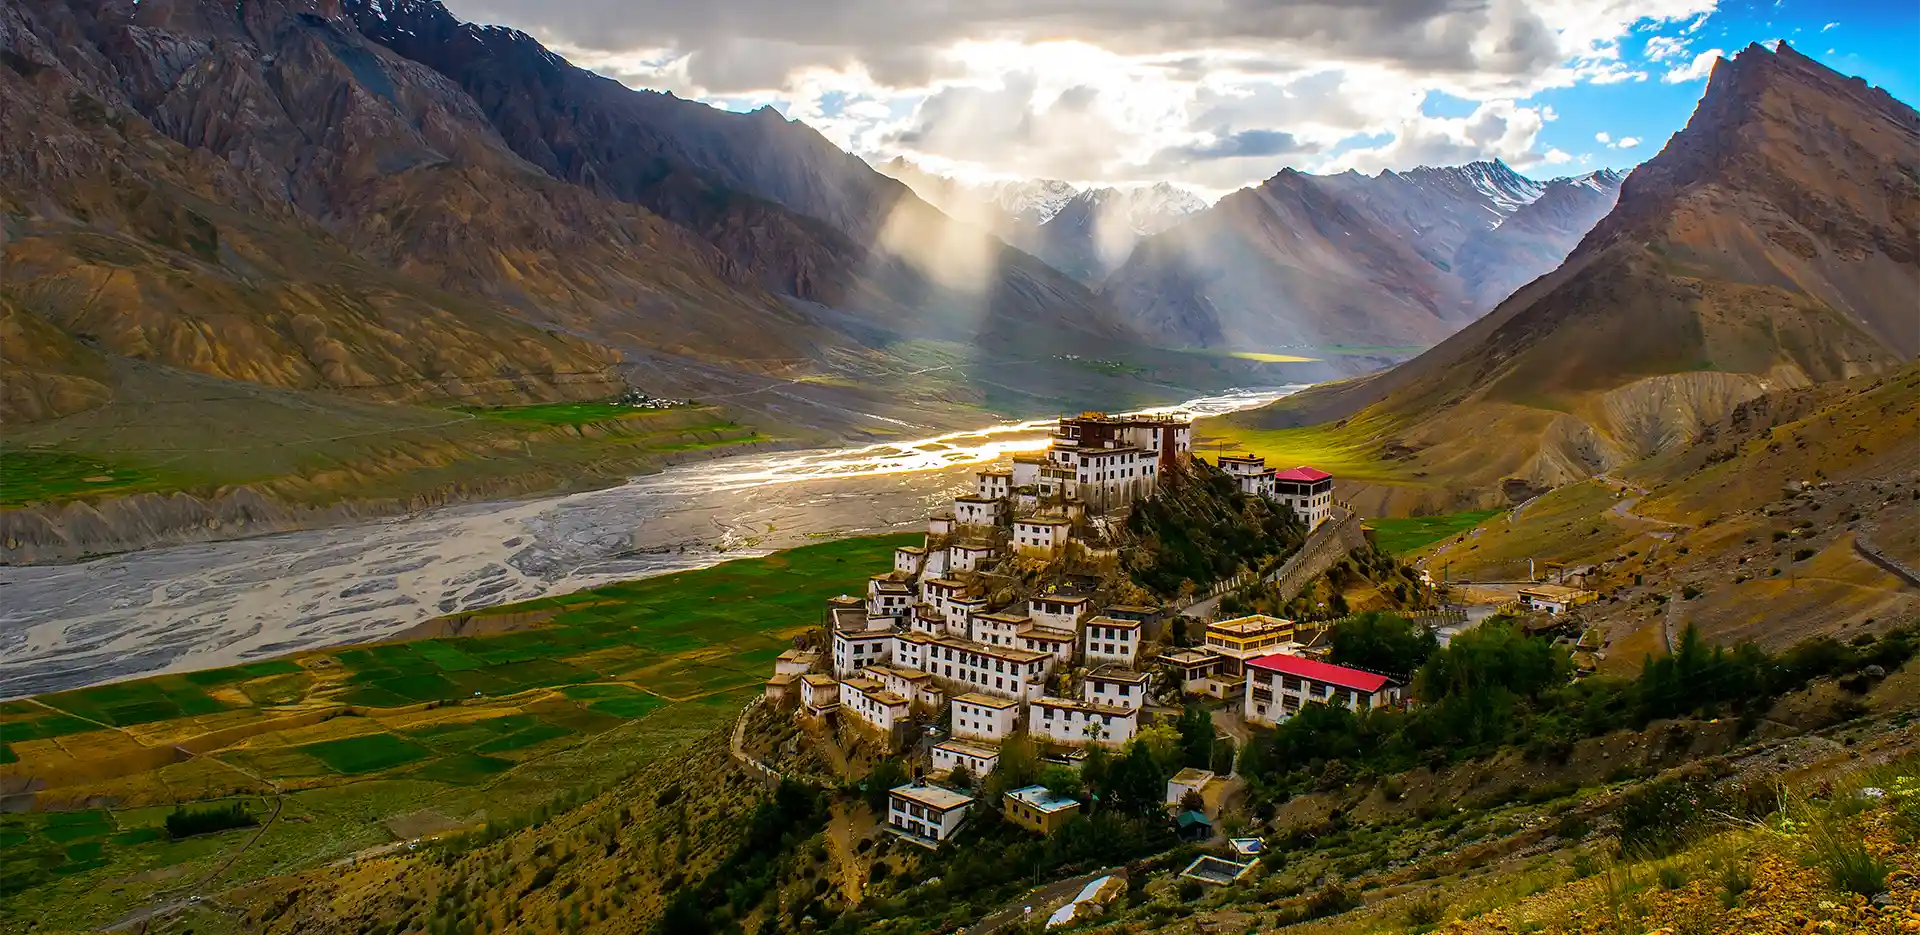 Best Time to Visit Spiti Valley